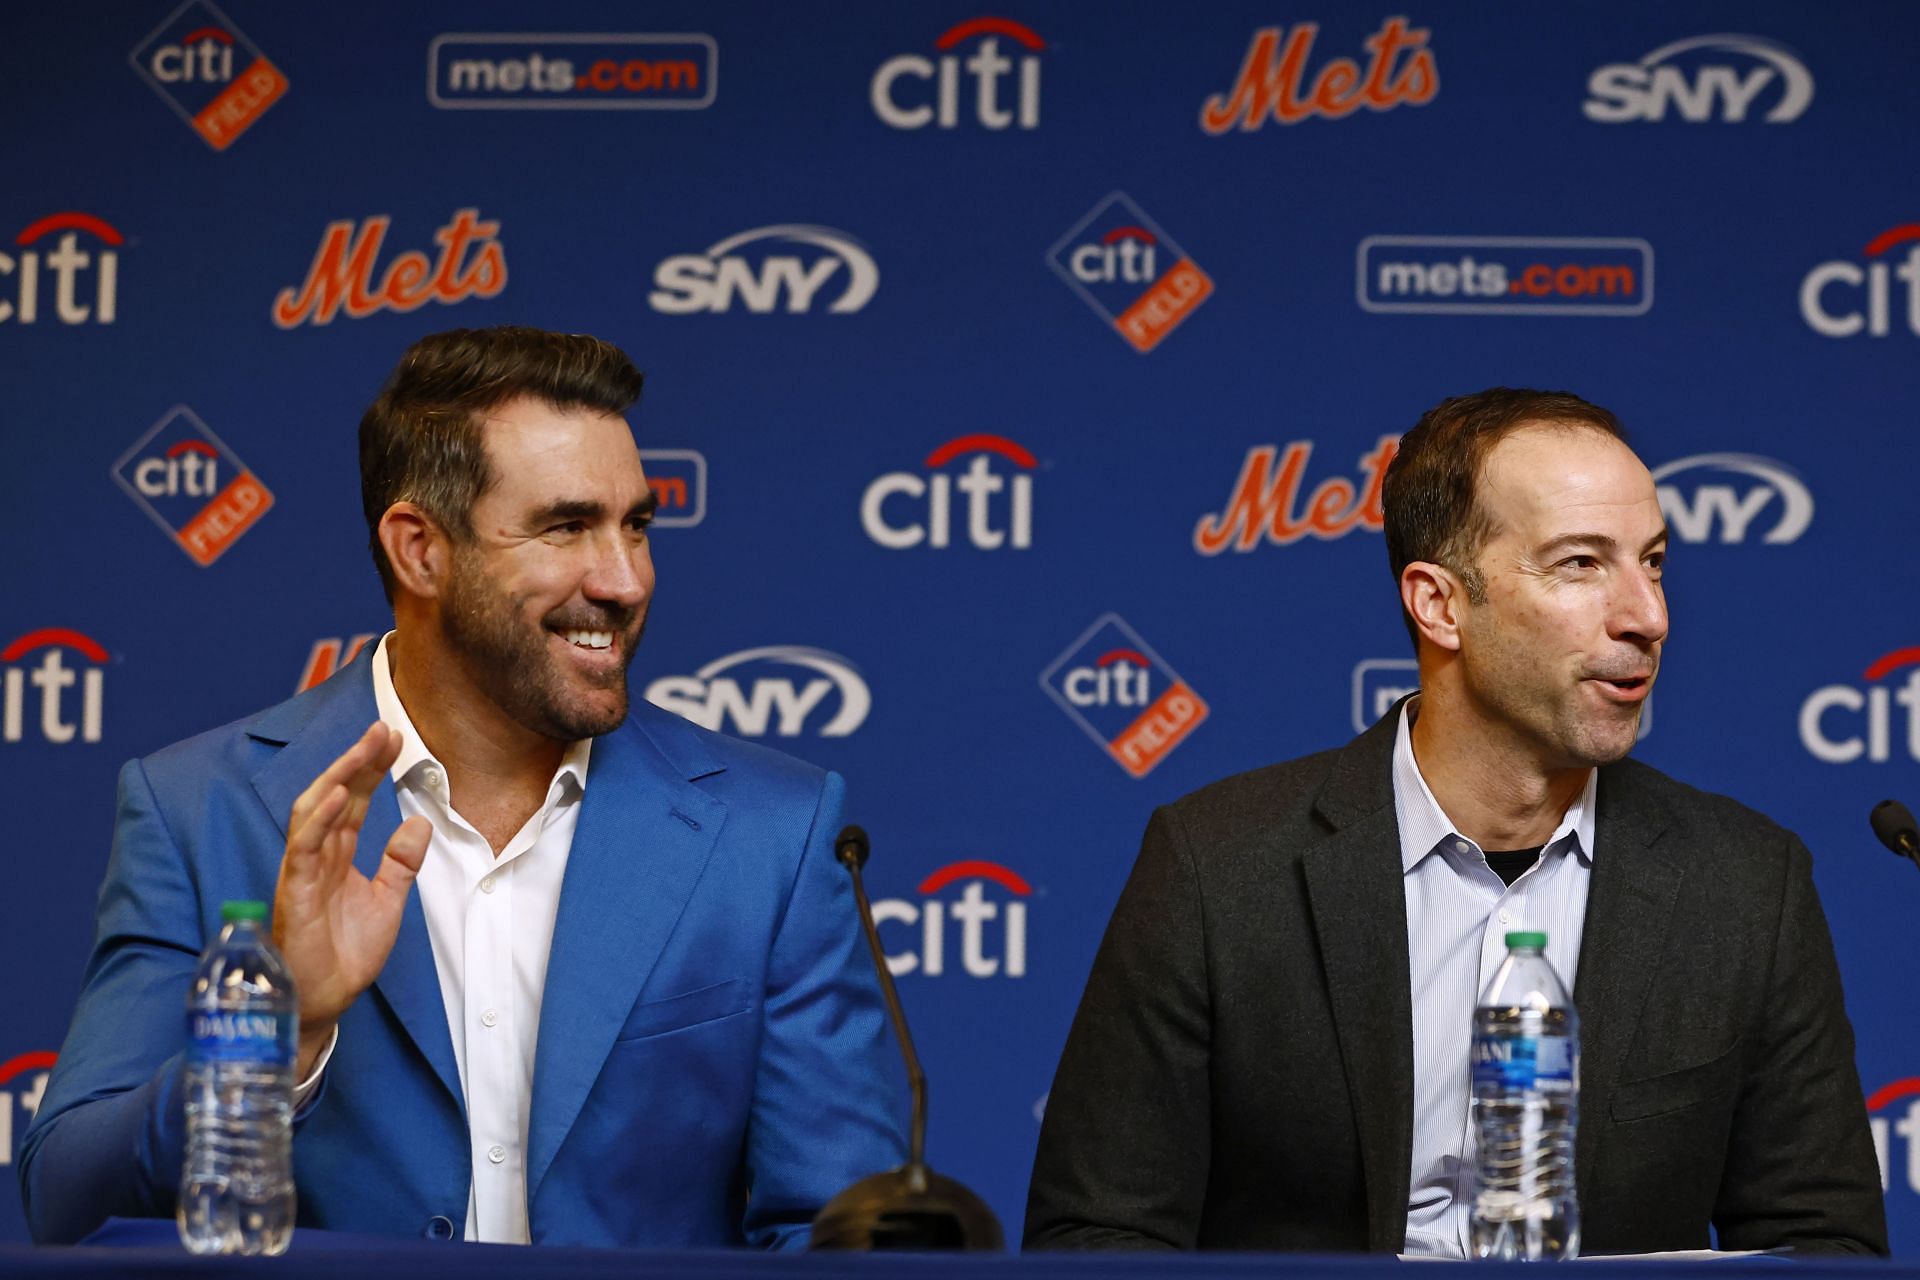 Mets Introduce Justin Verlander: Mets Introduce Justin Verlander NEW YORK, NY - DECEMBER 20: Pitcher Justin Verlander of the Mets smiles before he is introduced during a press conference at Citi Field on December 20, 2022 in New York City. (Photo by Rich Schultz/Getty Images)